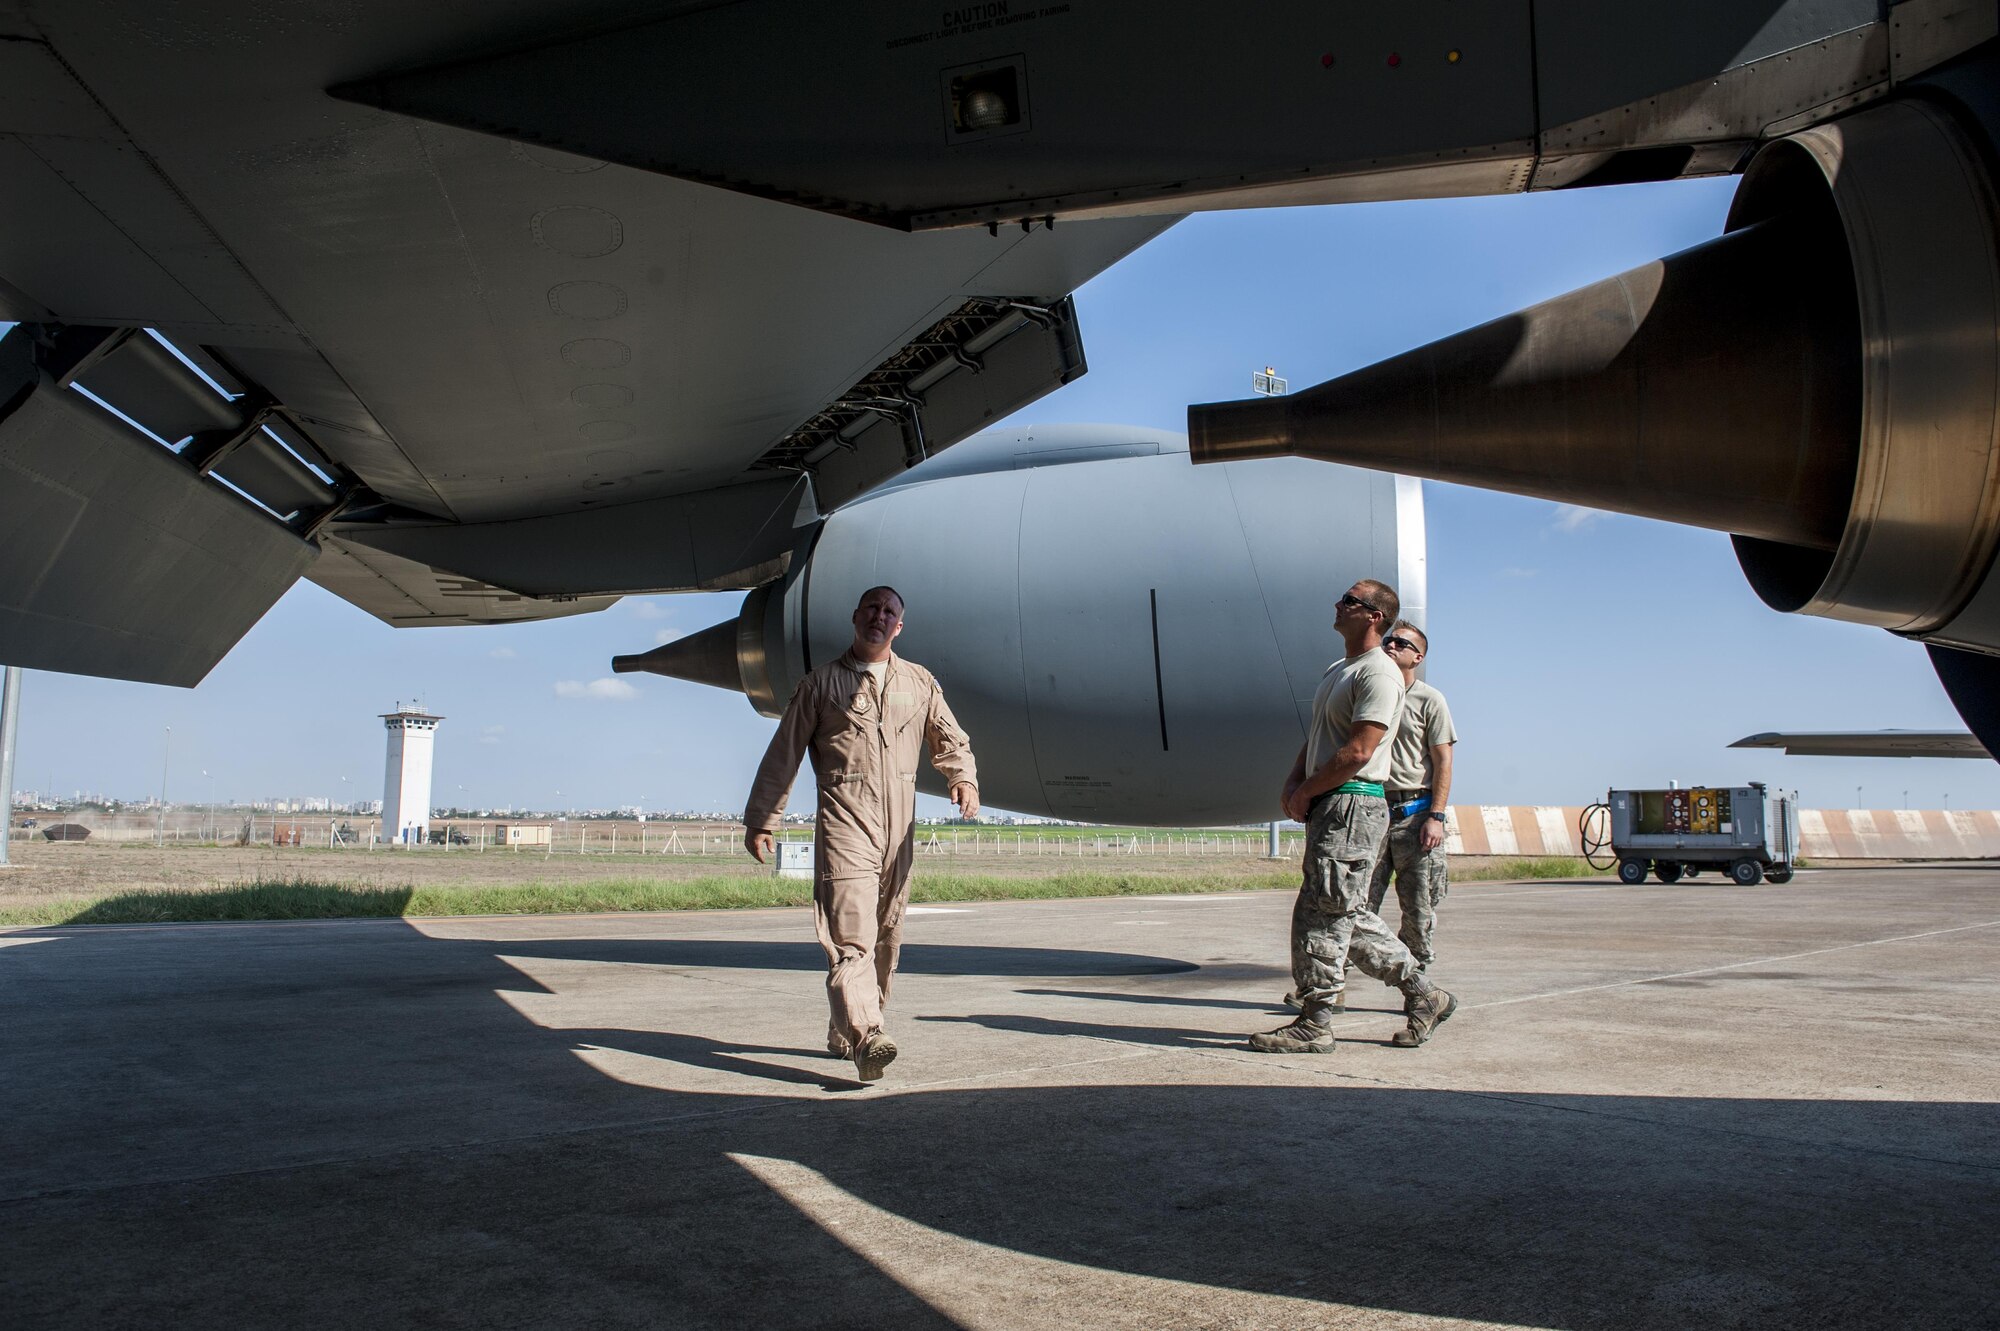 U.S. Air Force Capt. Jason, 22nd Expeditionary Air Refueling Squadron (EARS) KC-135 Stratotanker aircraft commander, walks around the aircraft to perform preflight inspections with Tech. Sgt. Jason and Staff Sgt. Jake, 22d EARS crew chiefs Sept. 19, 2016, at Incirlik Air Base, Turkey. Preflight inspections are required to be performed before every aircraft takeoff to better ensure safety. (U.S. Air Force photo by Staff Sgt. Jack Sanders)